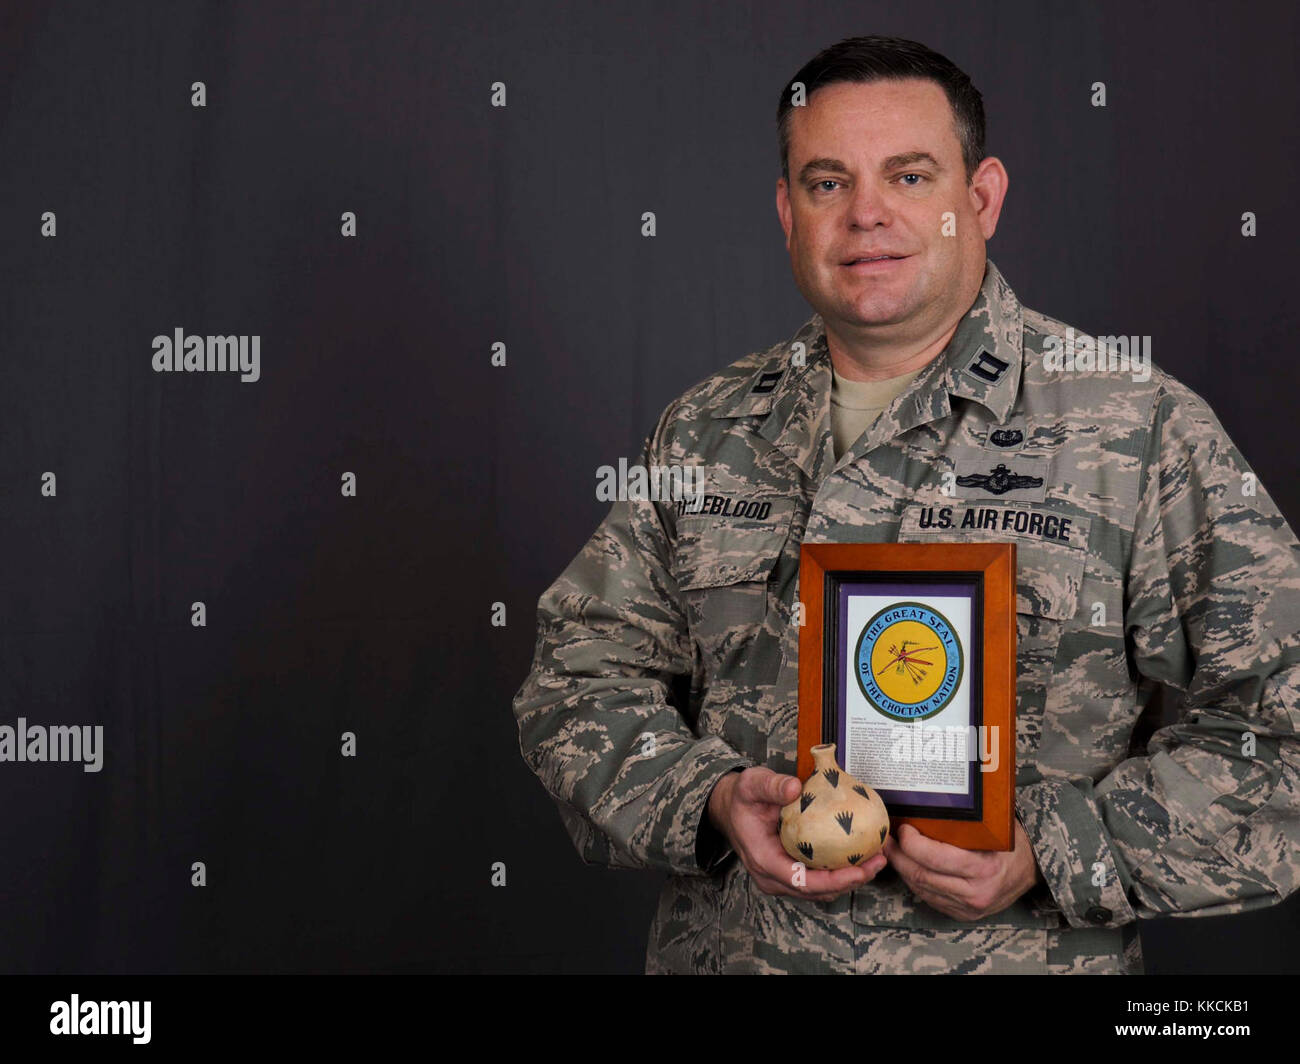 Capt. Travis Trueblood, 11th Wing assistant staff judge advocate, poses for a photo at Joint Base Andrews, Md., Nov. 16, 2017. Trueblood holds Native American art and the Choctaw Nation seal, which were gifted to him during his encounters and meetings with other members of the Choctaw Nation. November is designated as National American Indian Heritage Month, a time to celebrate the cultures, traditions, histories, and acknowledge the contributions of Native Americans.  (U.S. Air Force photo by Airman Michael Murphy) Stock Photo